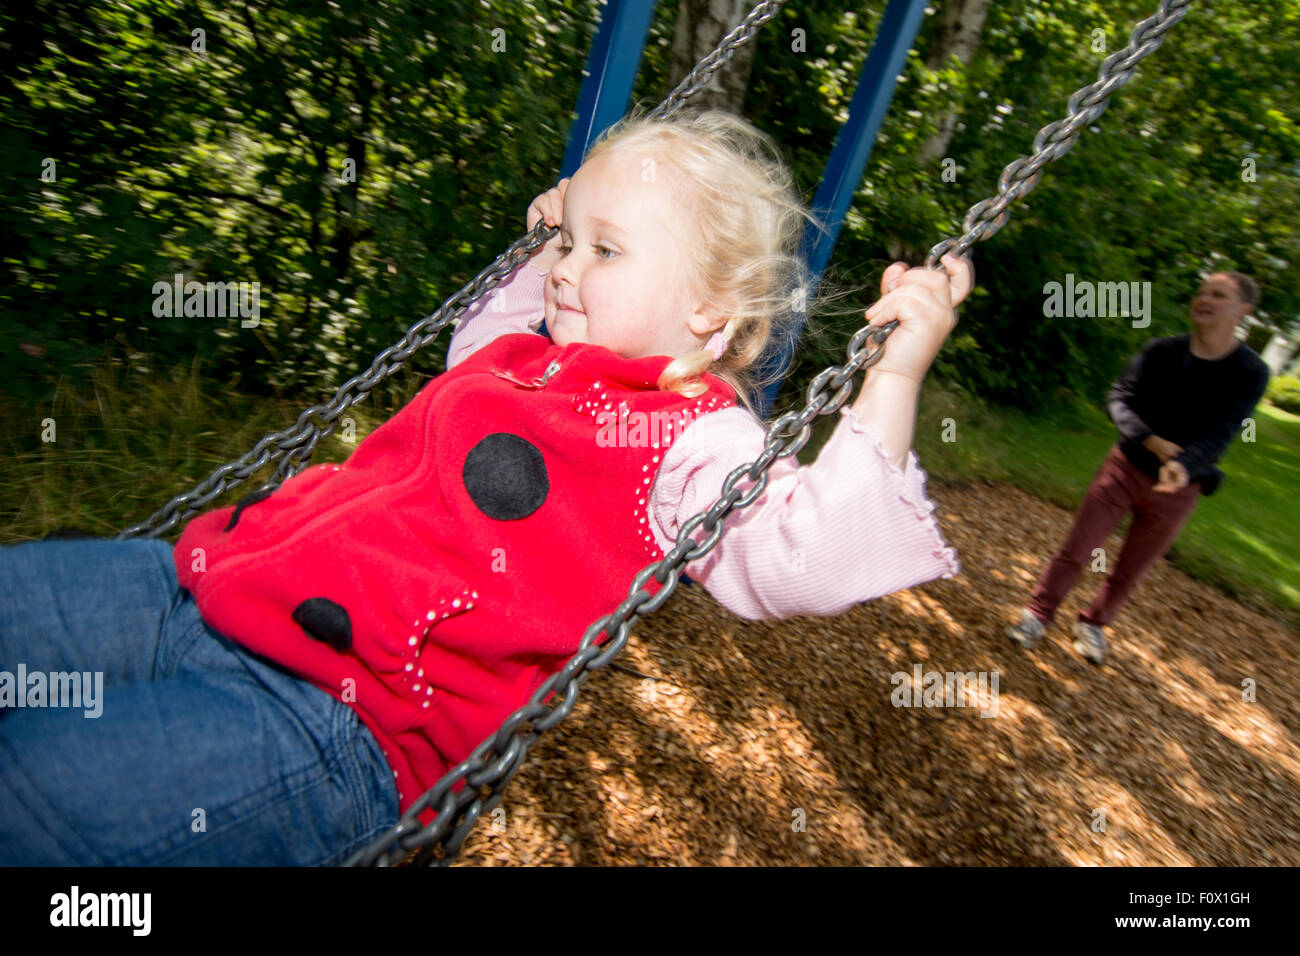 Little girl on swing with Dad in background. Stock Photo